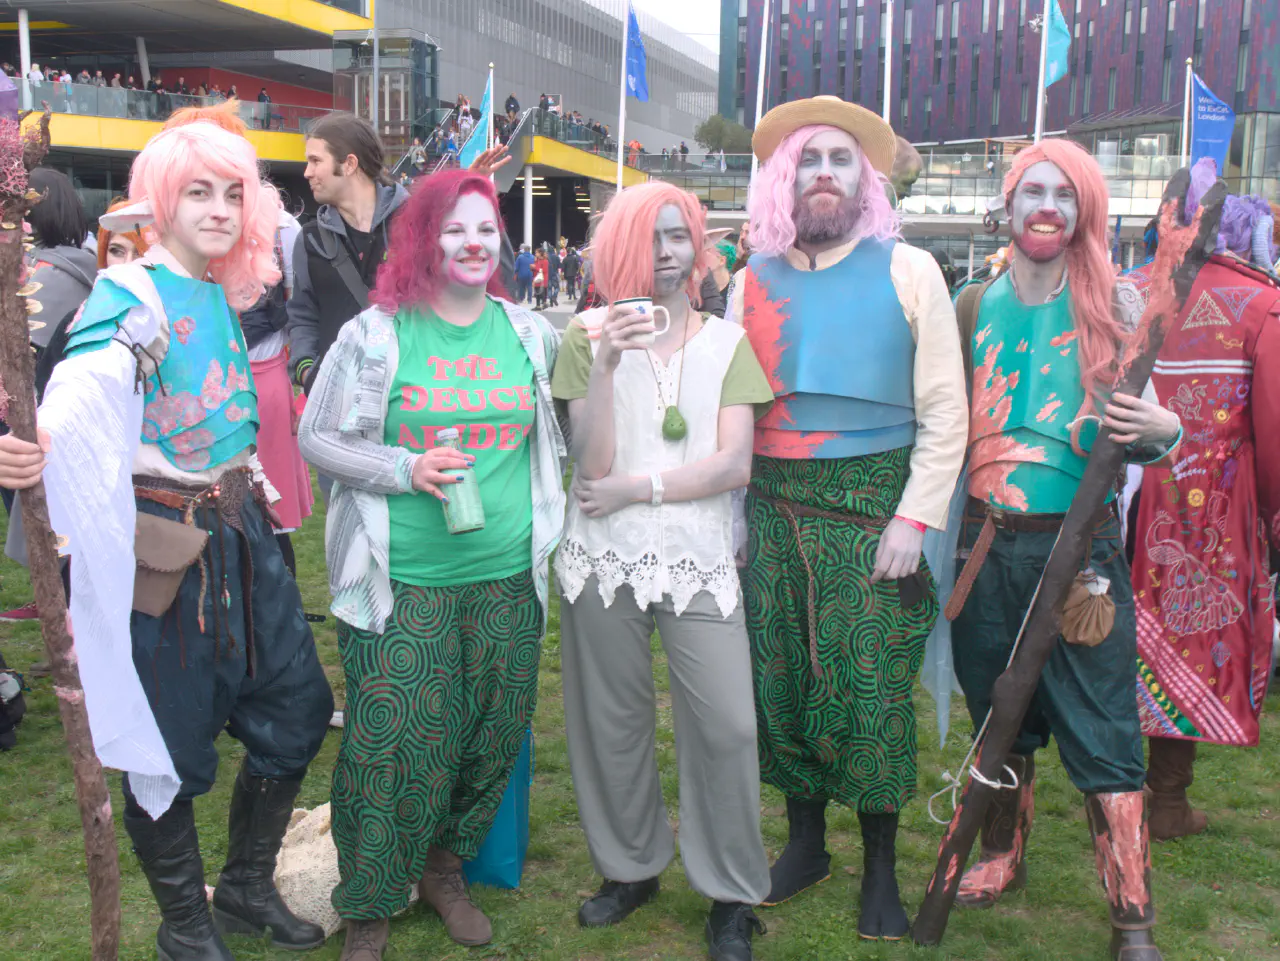 Five individuals lined up outside the Excel on a patch of grass, all dressed as various interpretations of Caduceus Clay